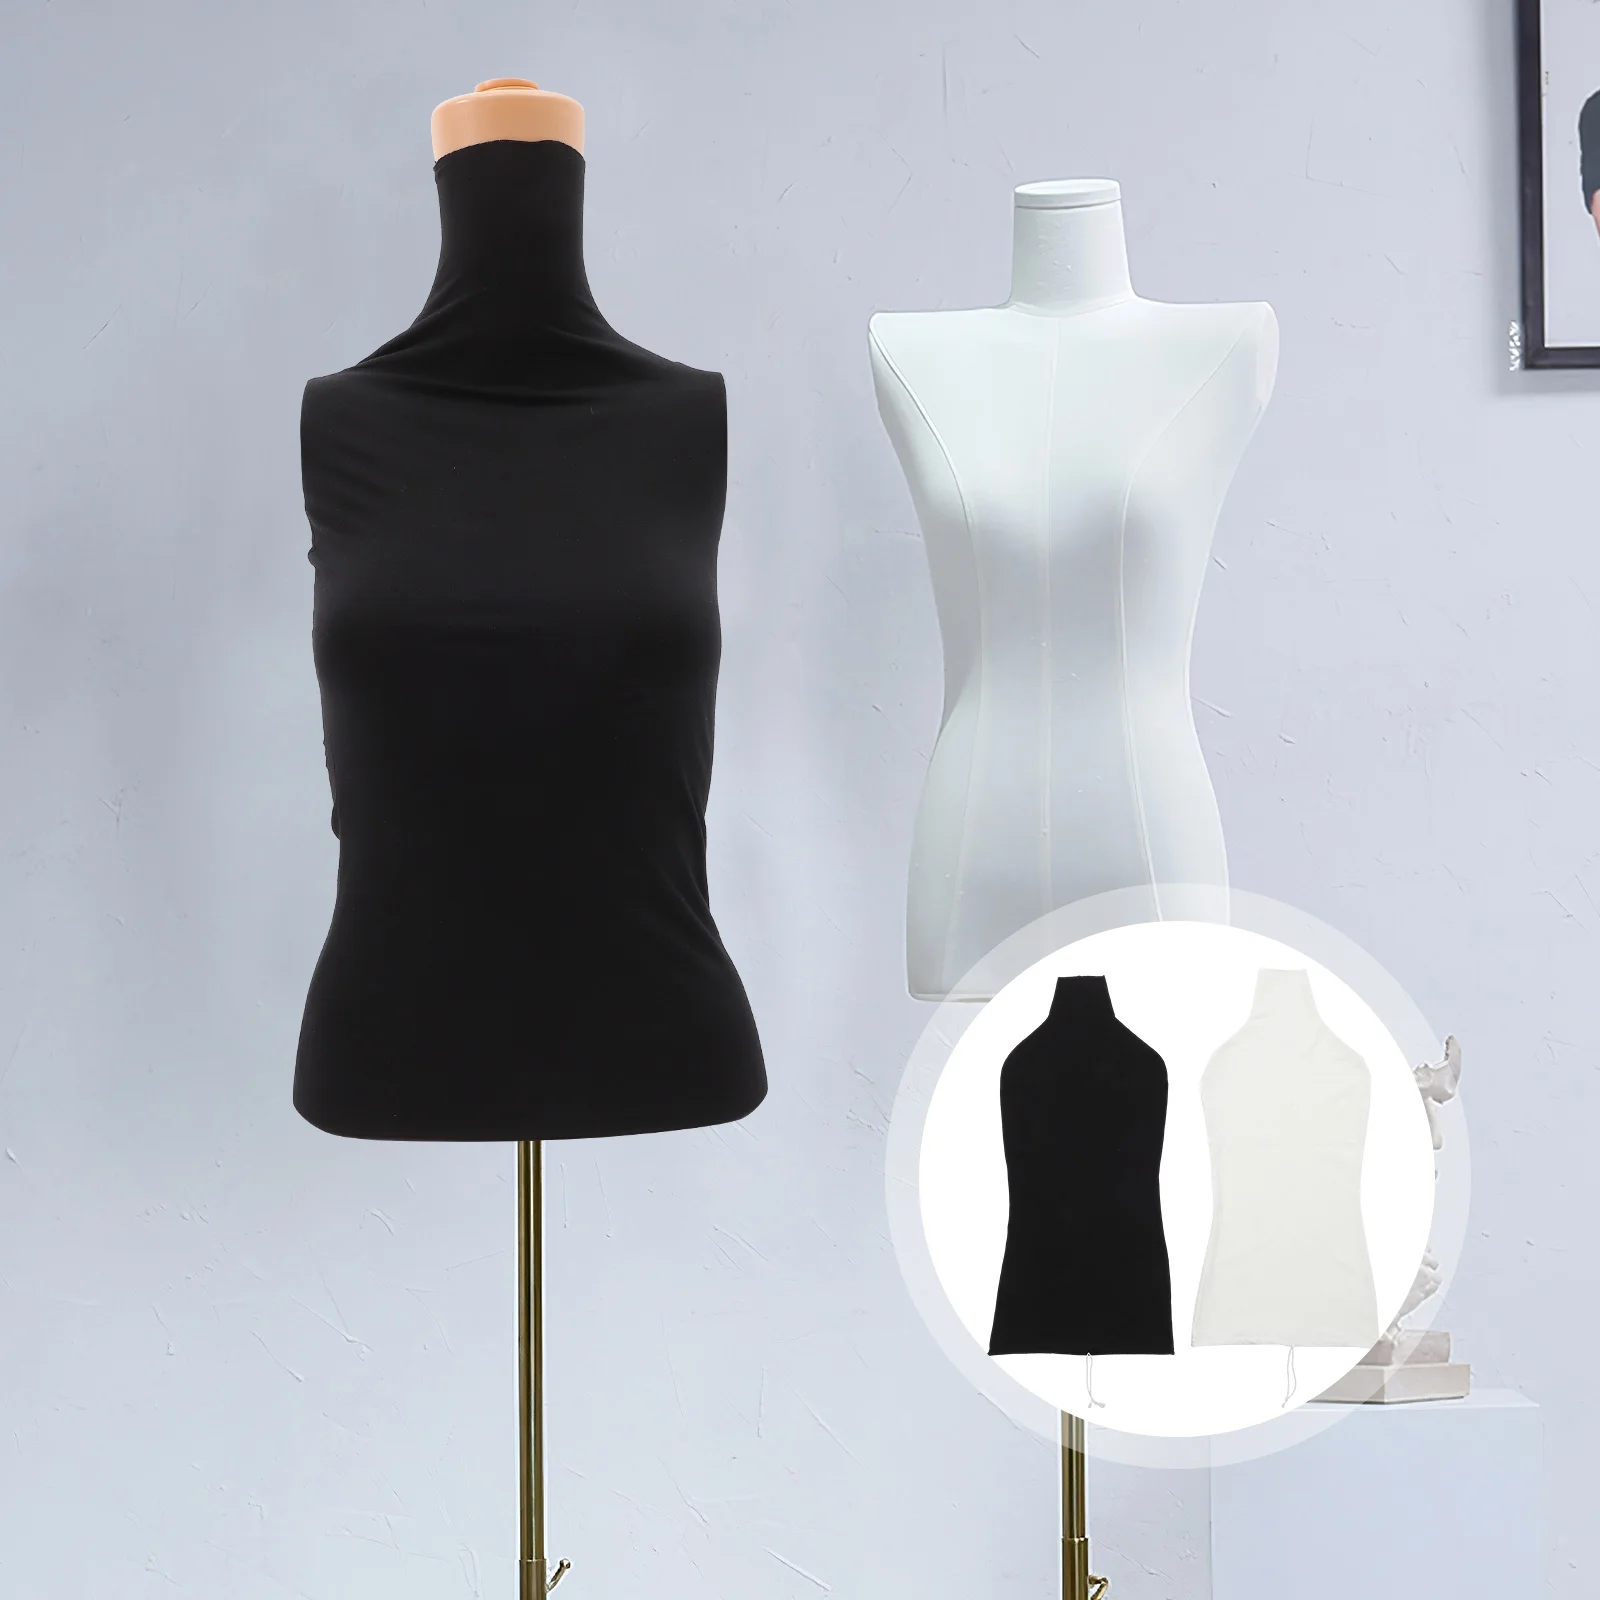 2Pcs Mannequin Fabric Cover Female Torso Body Cover Upper Body Protector Mannequin Supplies for for Mannequin Body ( Black